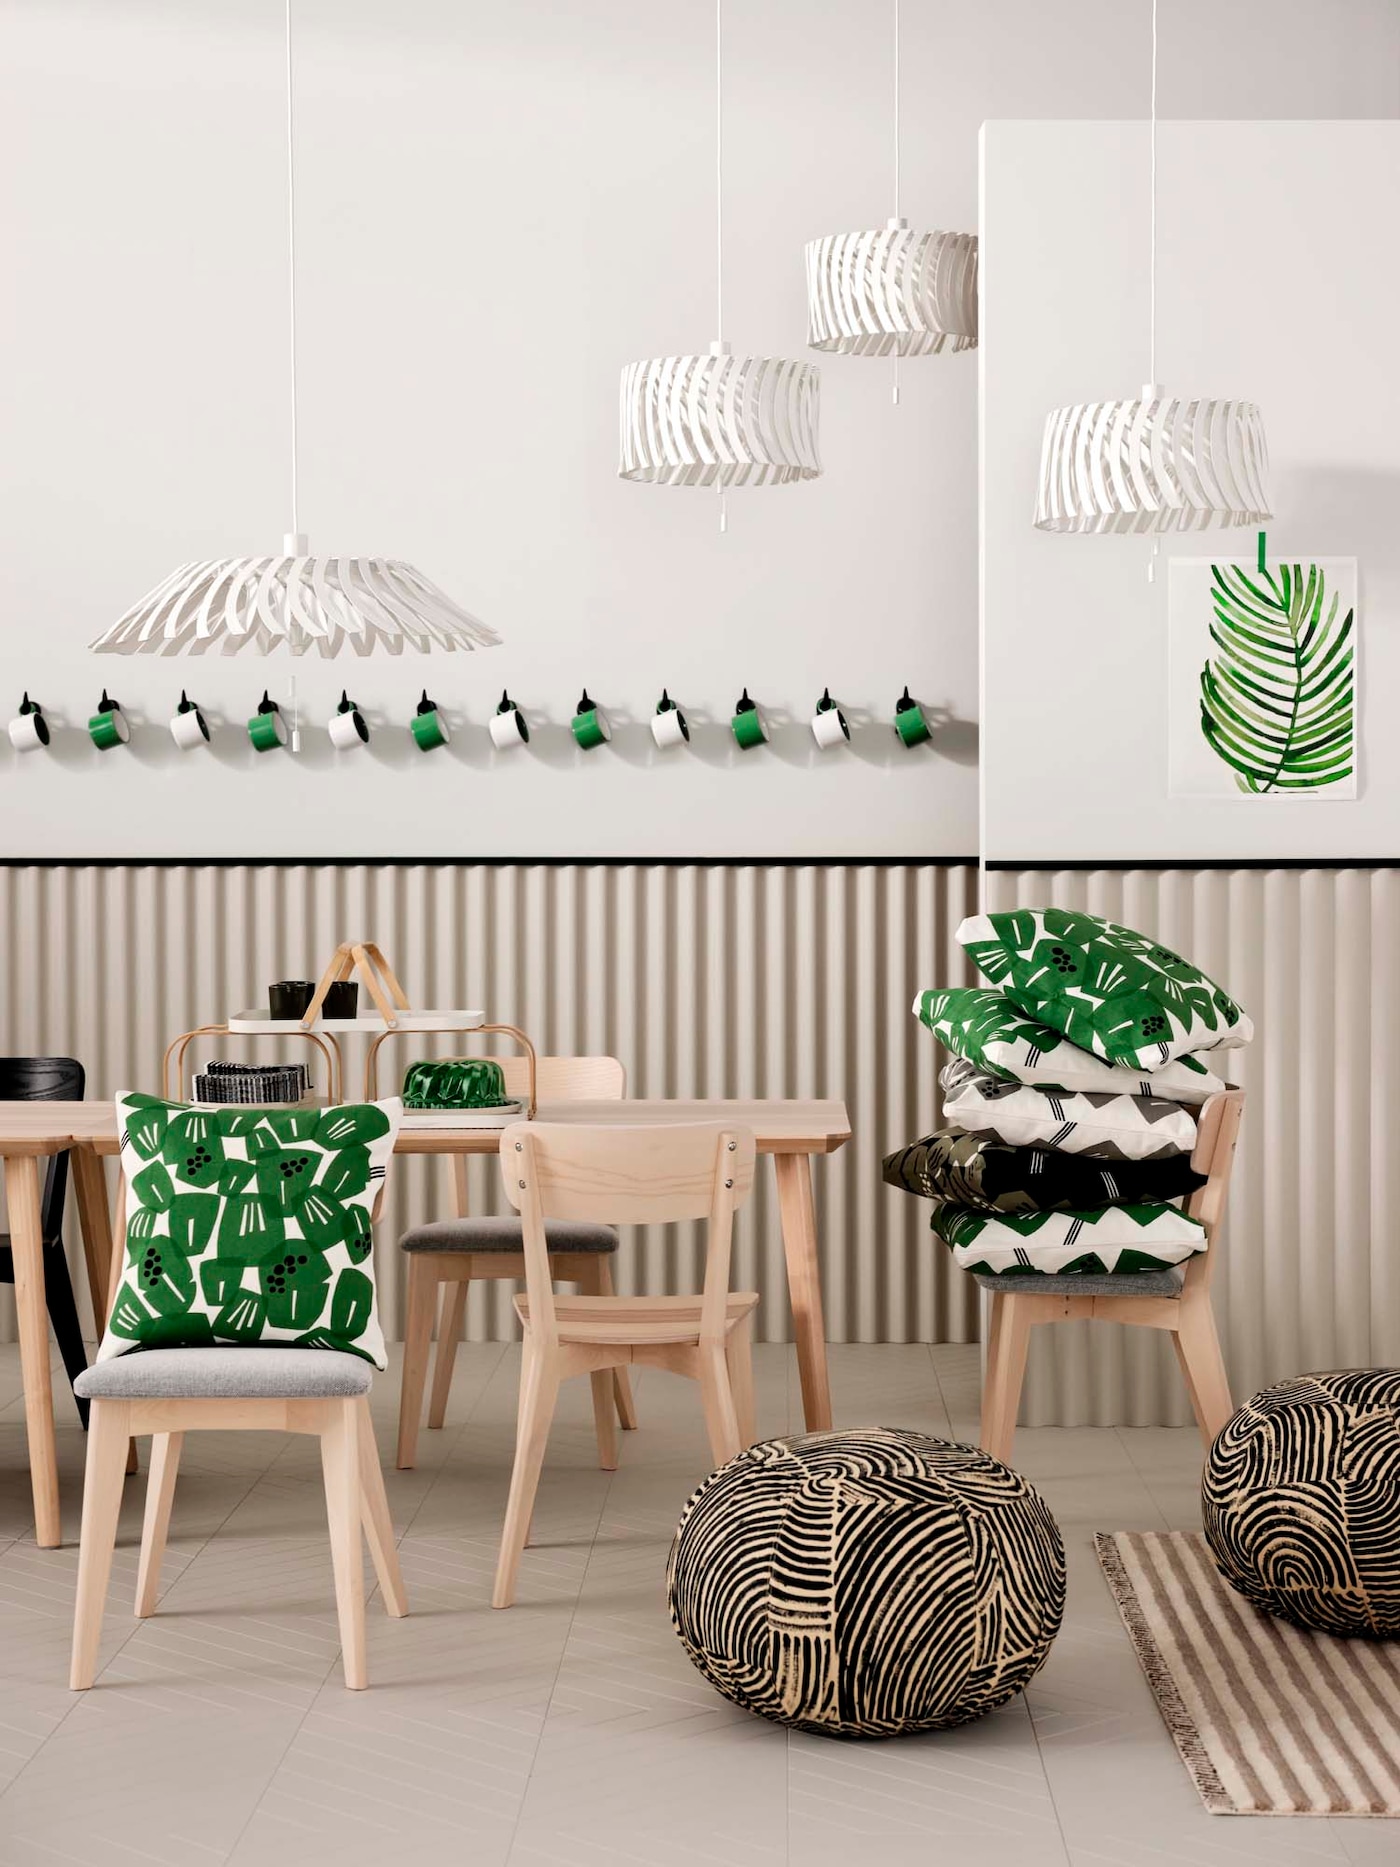 LISABO chairs are placed around a LISABO table. Some chairs are piled with cushions and four pendant lamps hang from above.